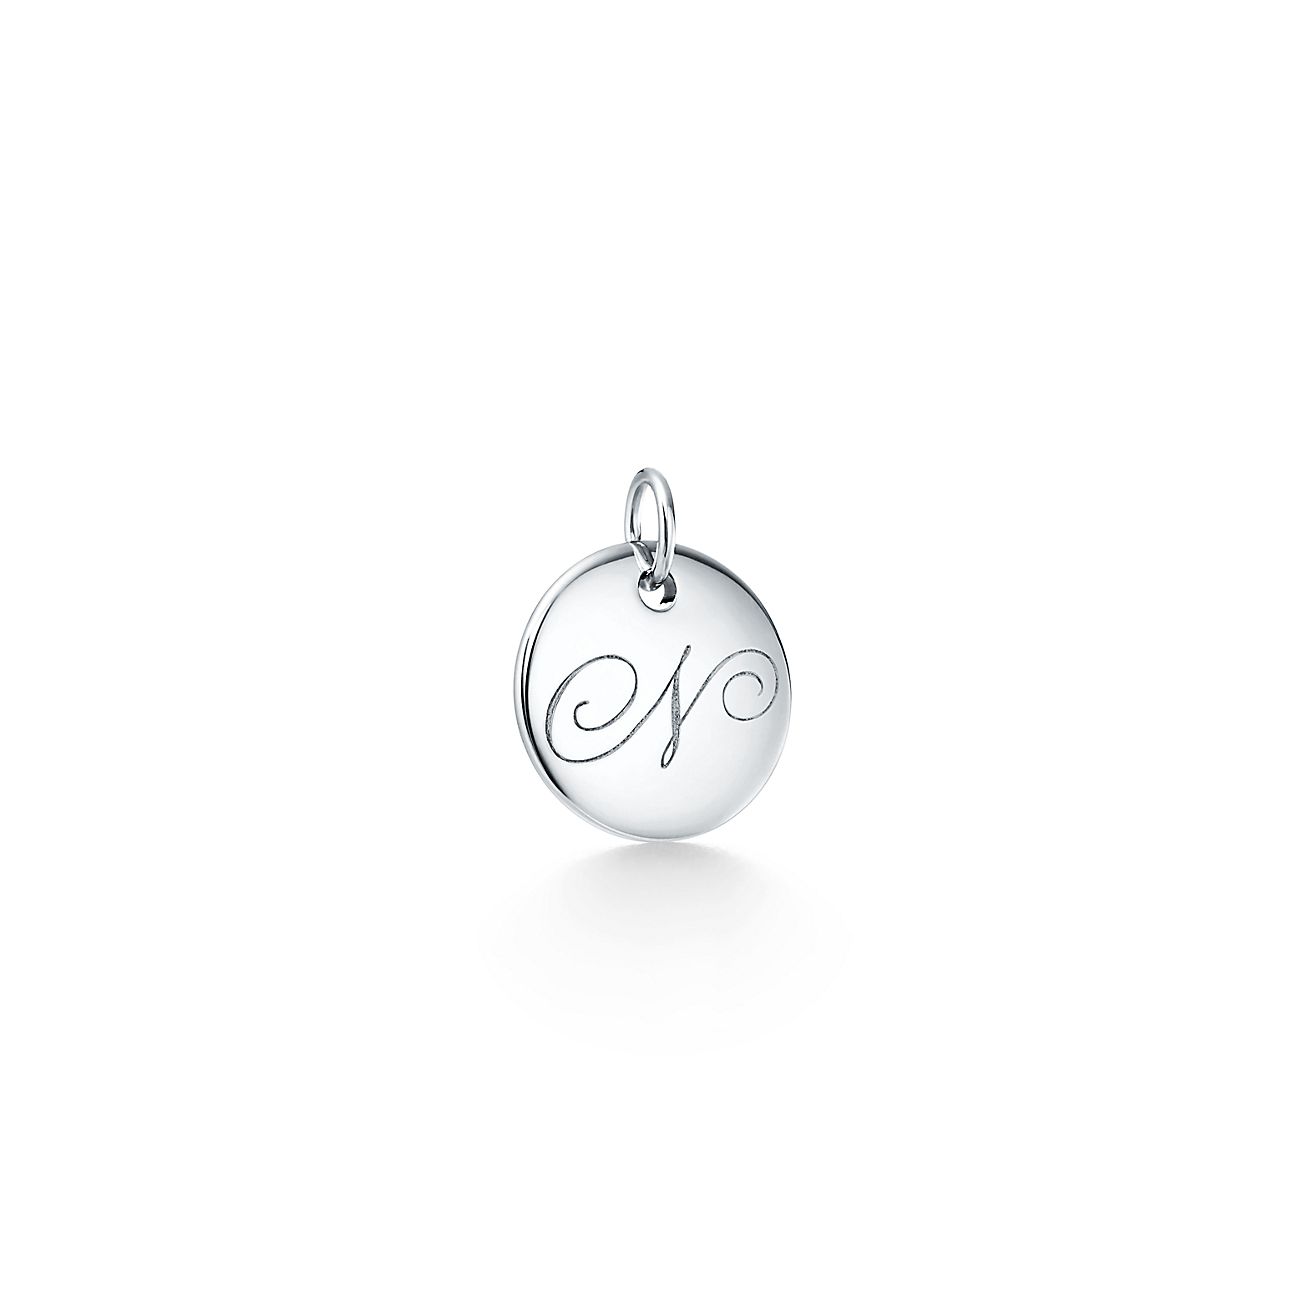 Tiffany Notes N Disc Charm in Silver, A 